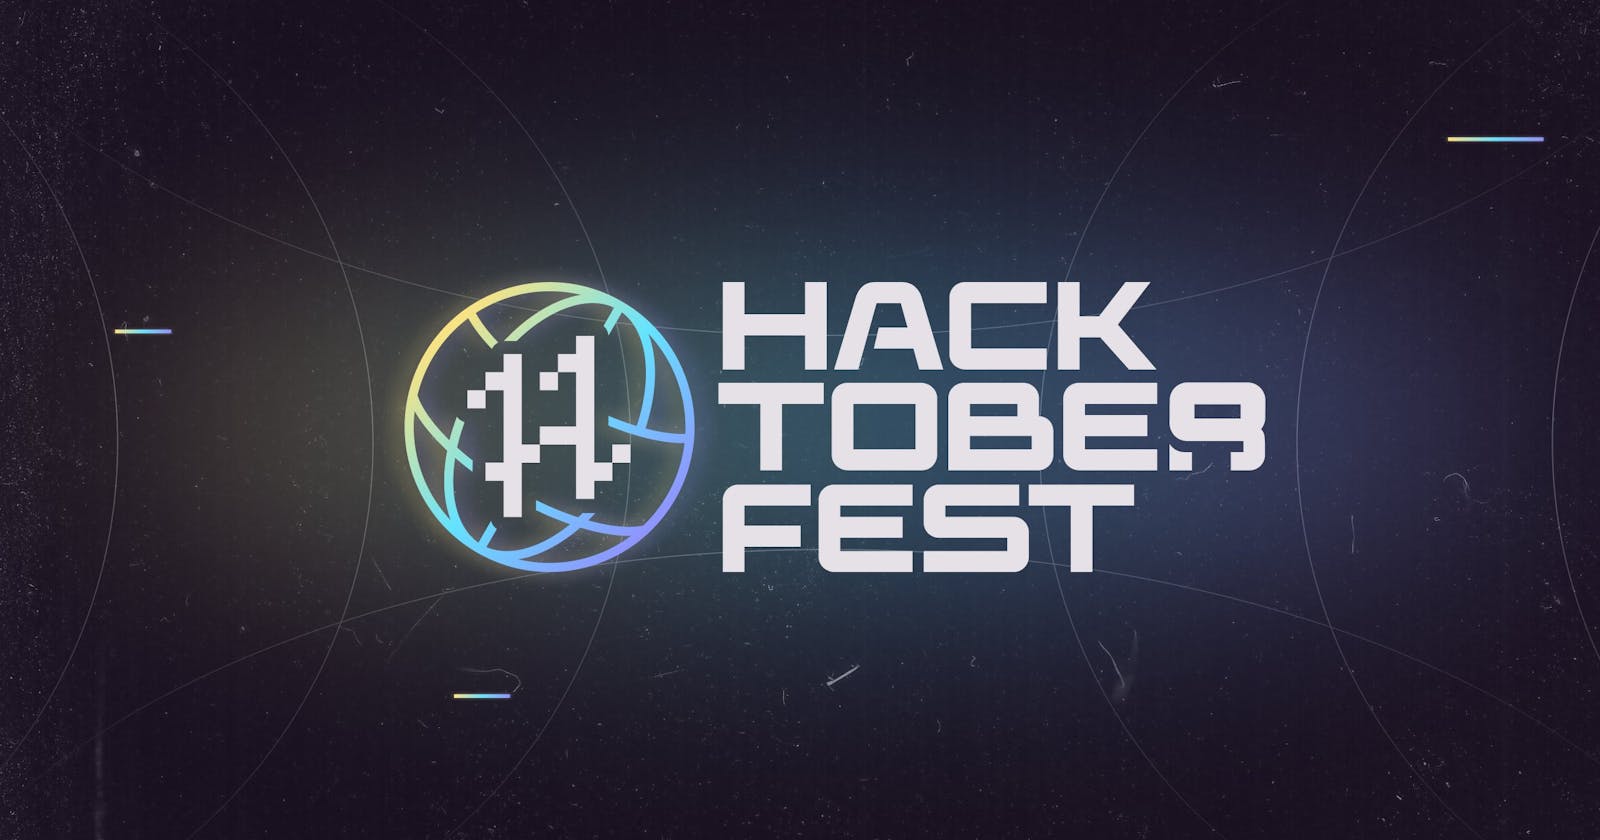 How to Have Fun With Hacktoberfest